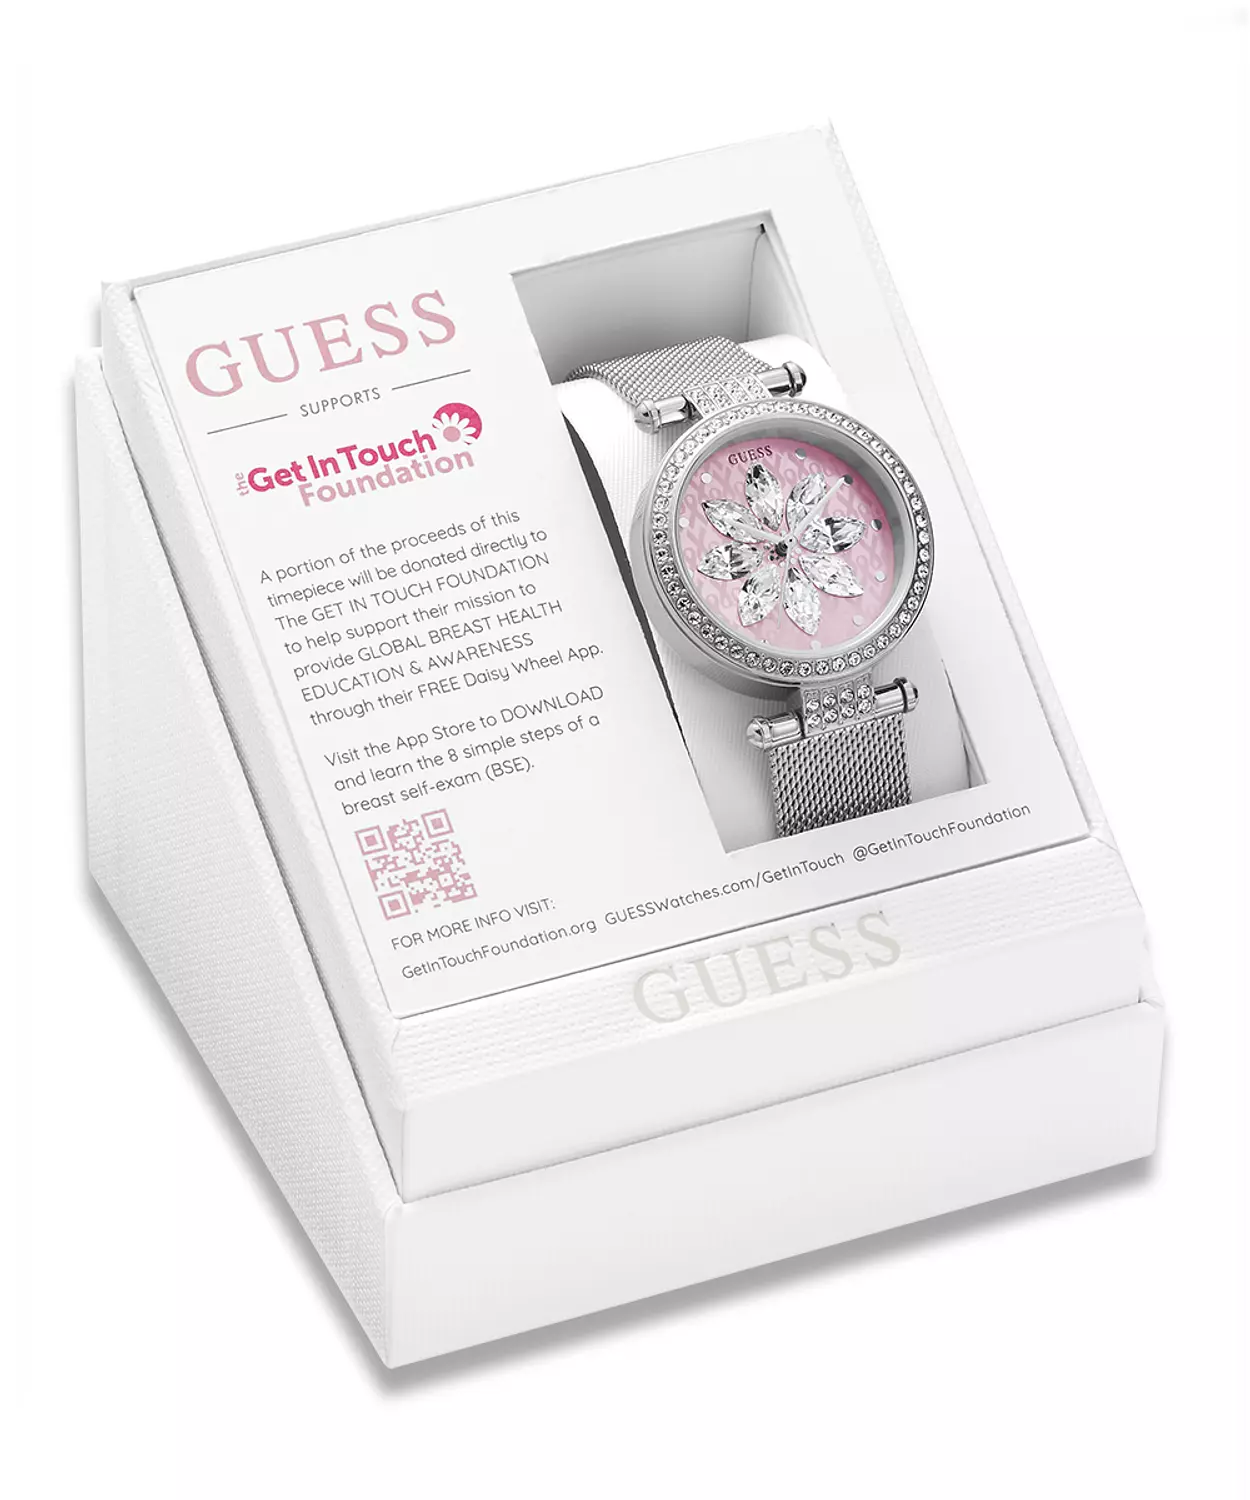 GUESS GW0032L3 ANALOG WATCH For Women Round Shape Silver Stainless Steel/Mesh Polished Bracelet 5